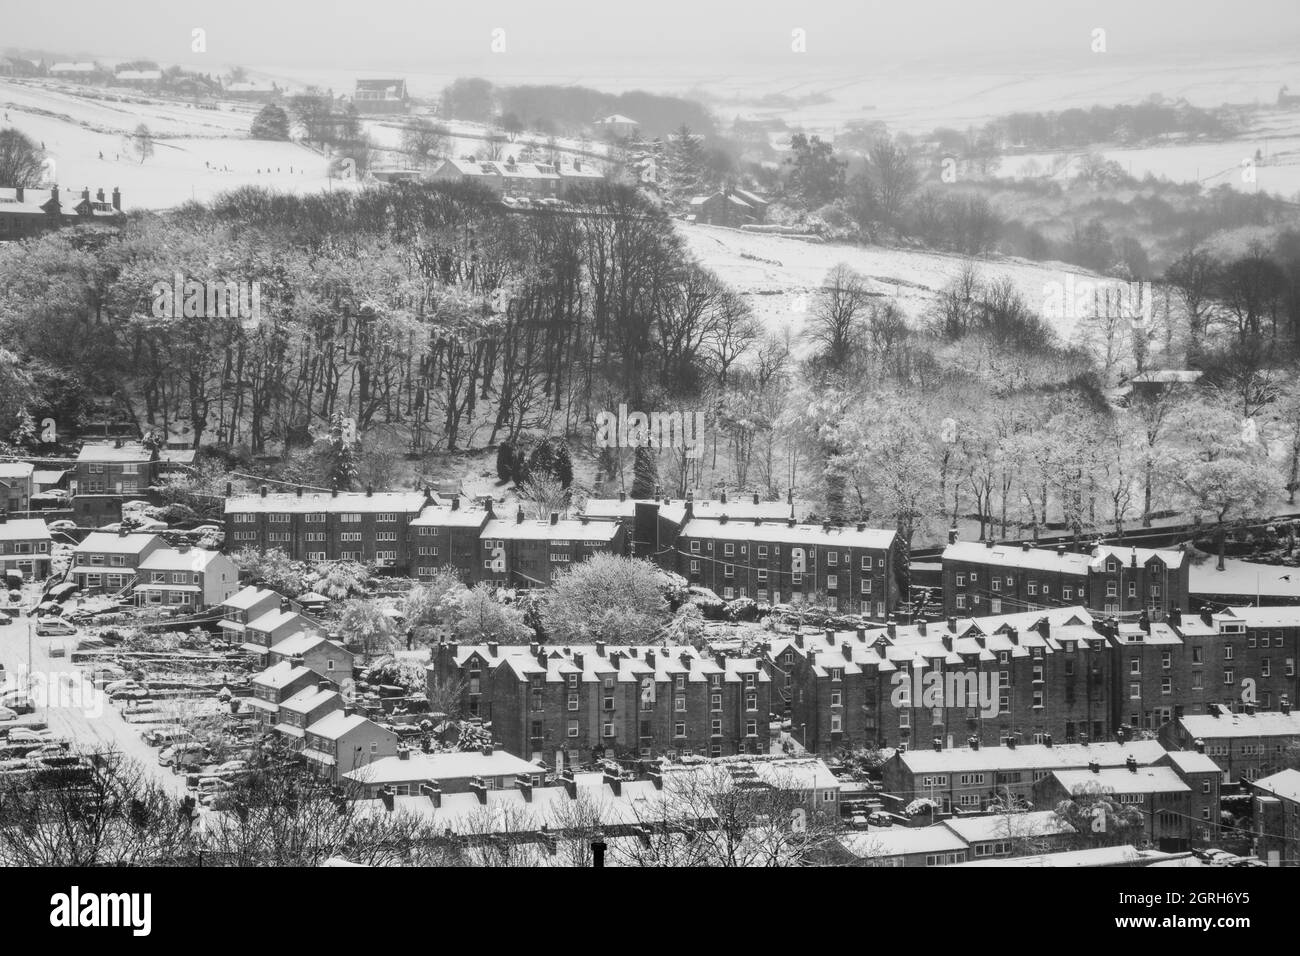 2 February 2021. The Yorkshire town of Hebden Bridge, in Calderdale after heavy snowfall overnight on 1st February 2021.Pictures by Phil Taylor ARPS.  For Alamy.com Stock Photo